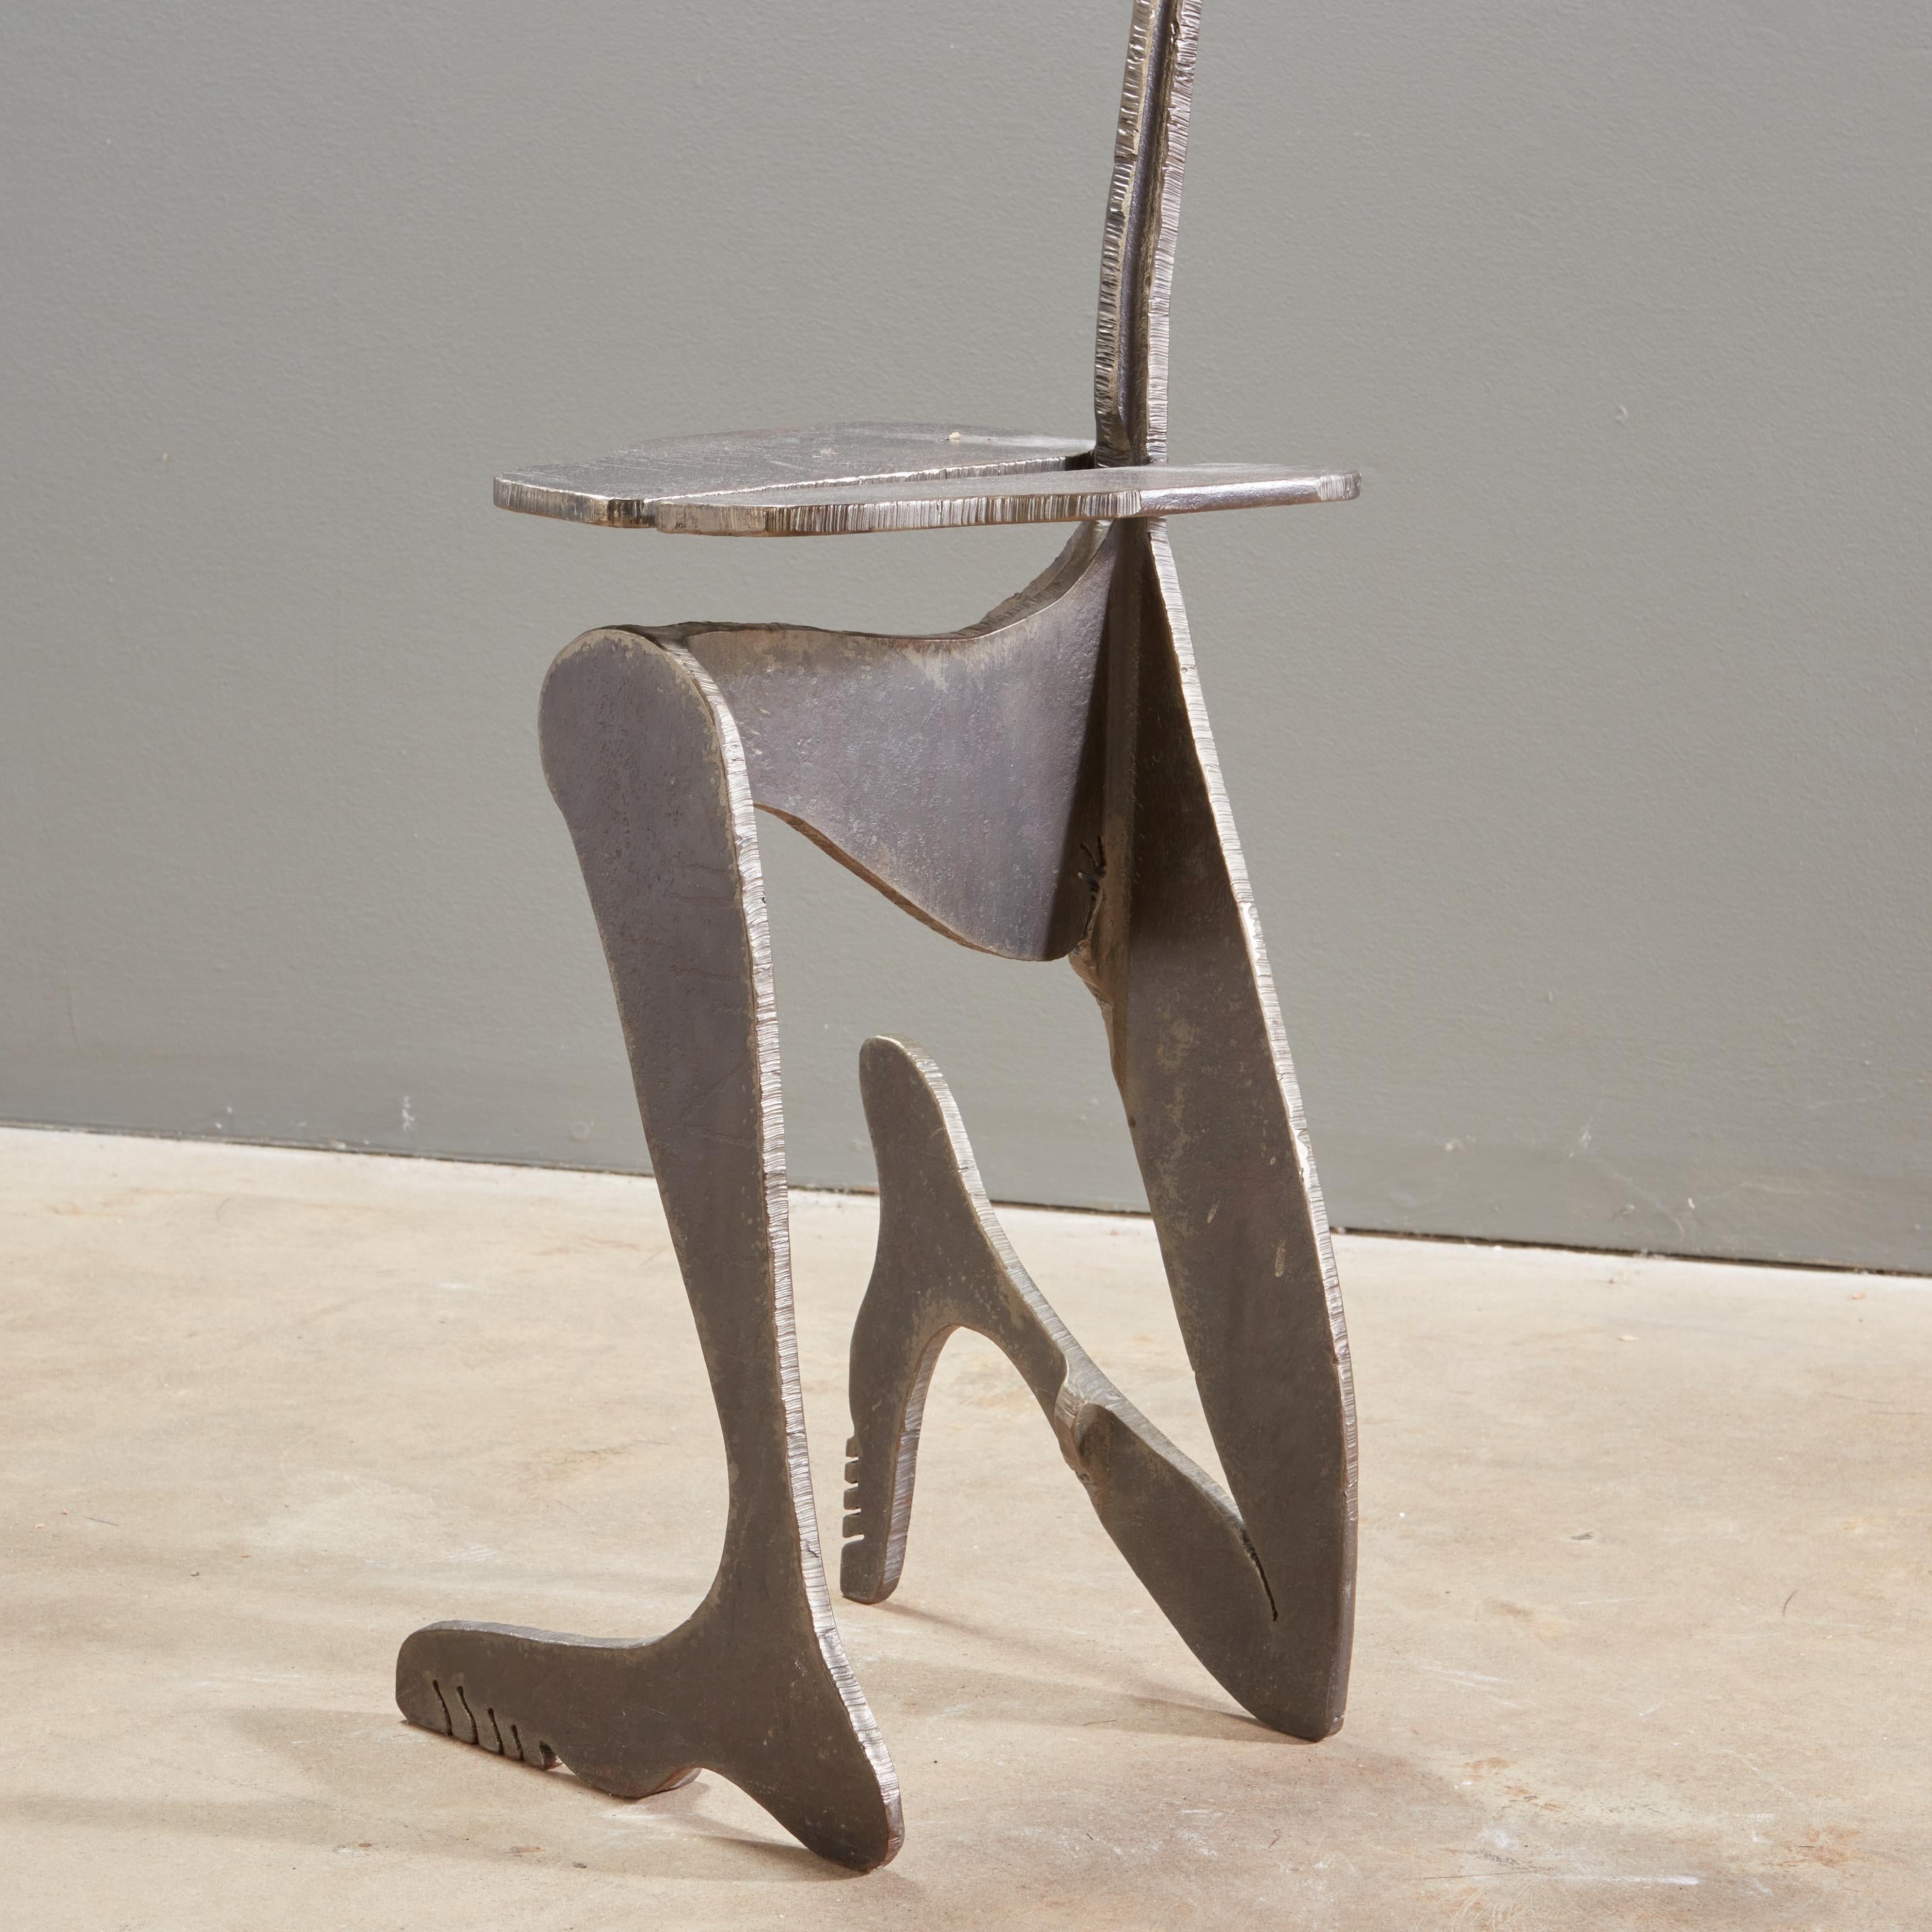 Artist Made Sculptural Figural Torch Cut Steel Chair Albert Leon Wilson In Excellent Condition For Sale In Greensboro, NC